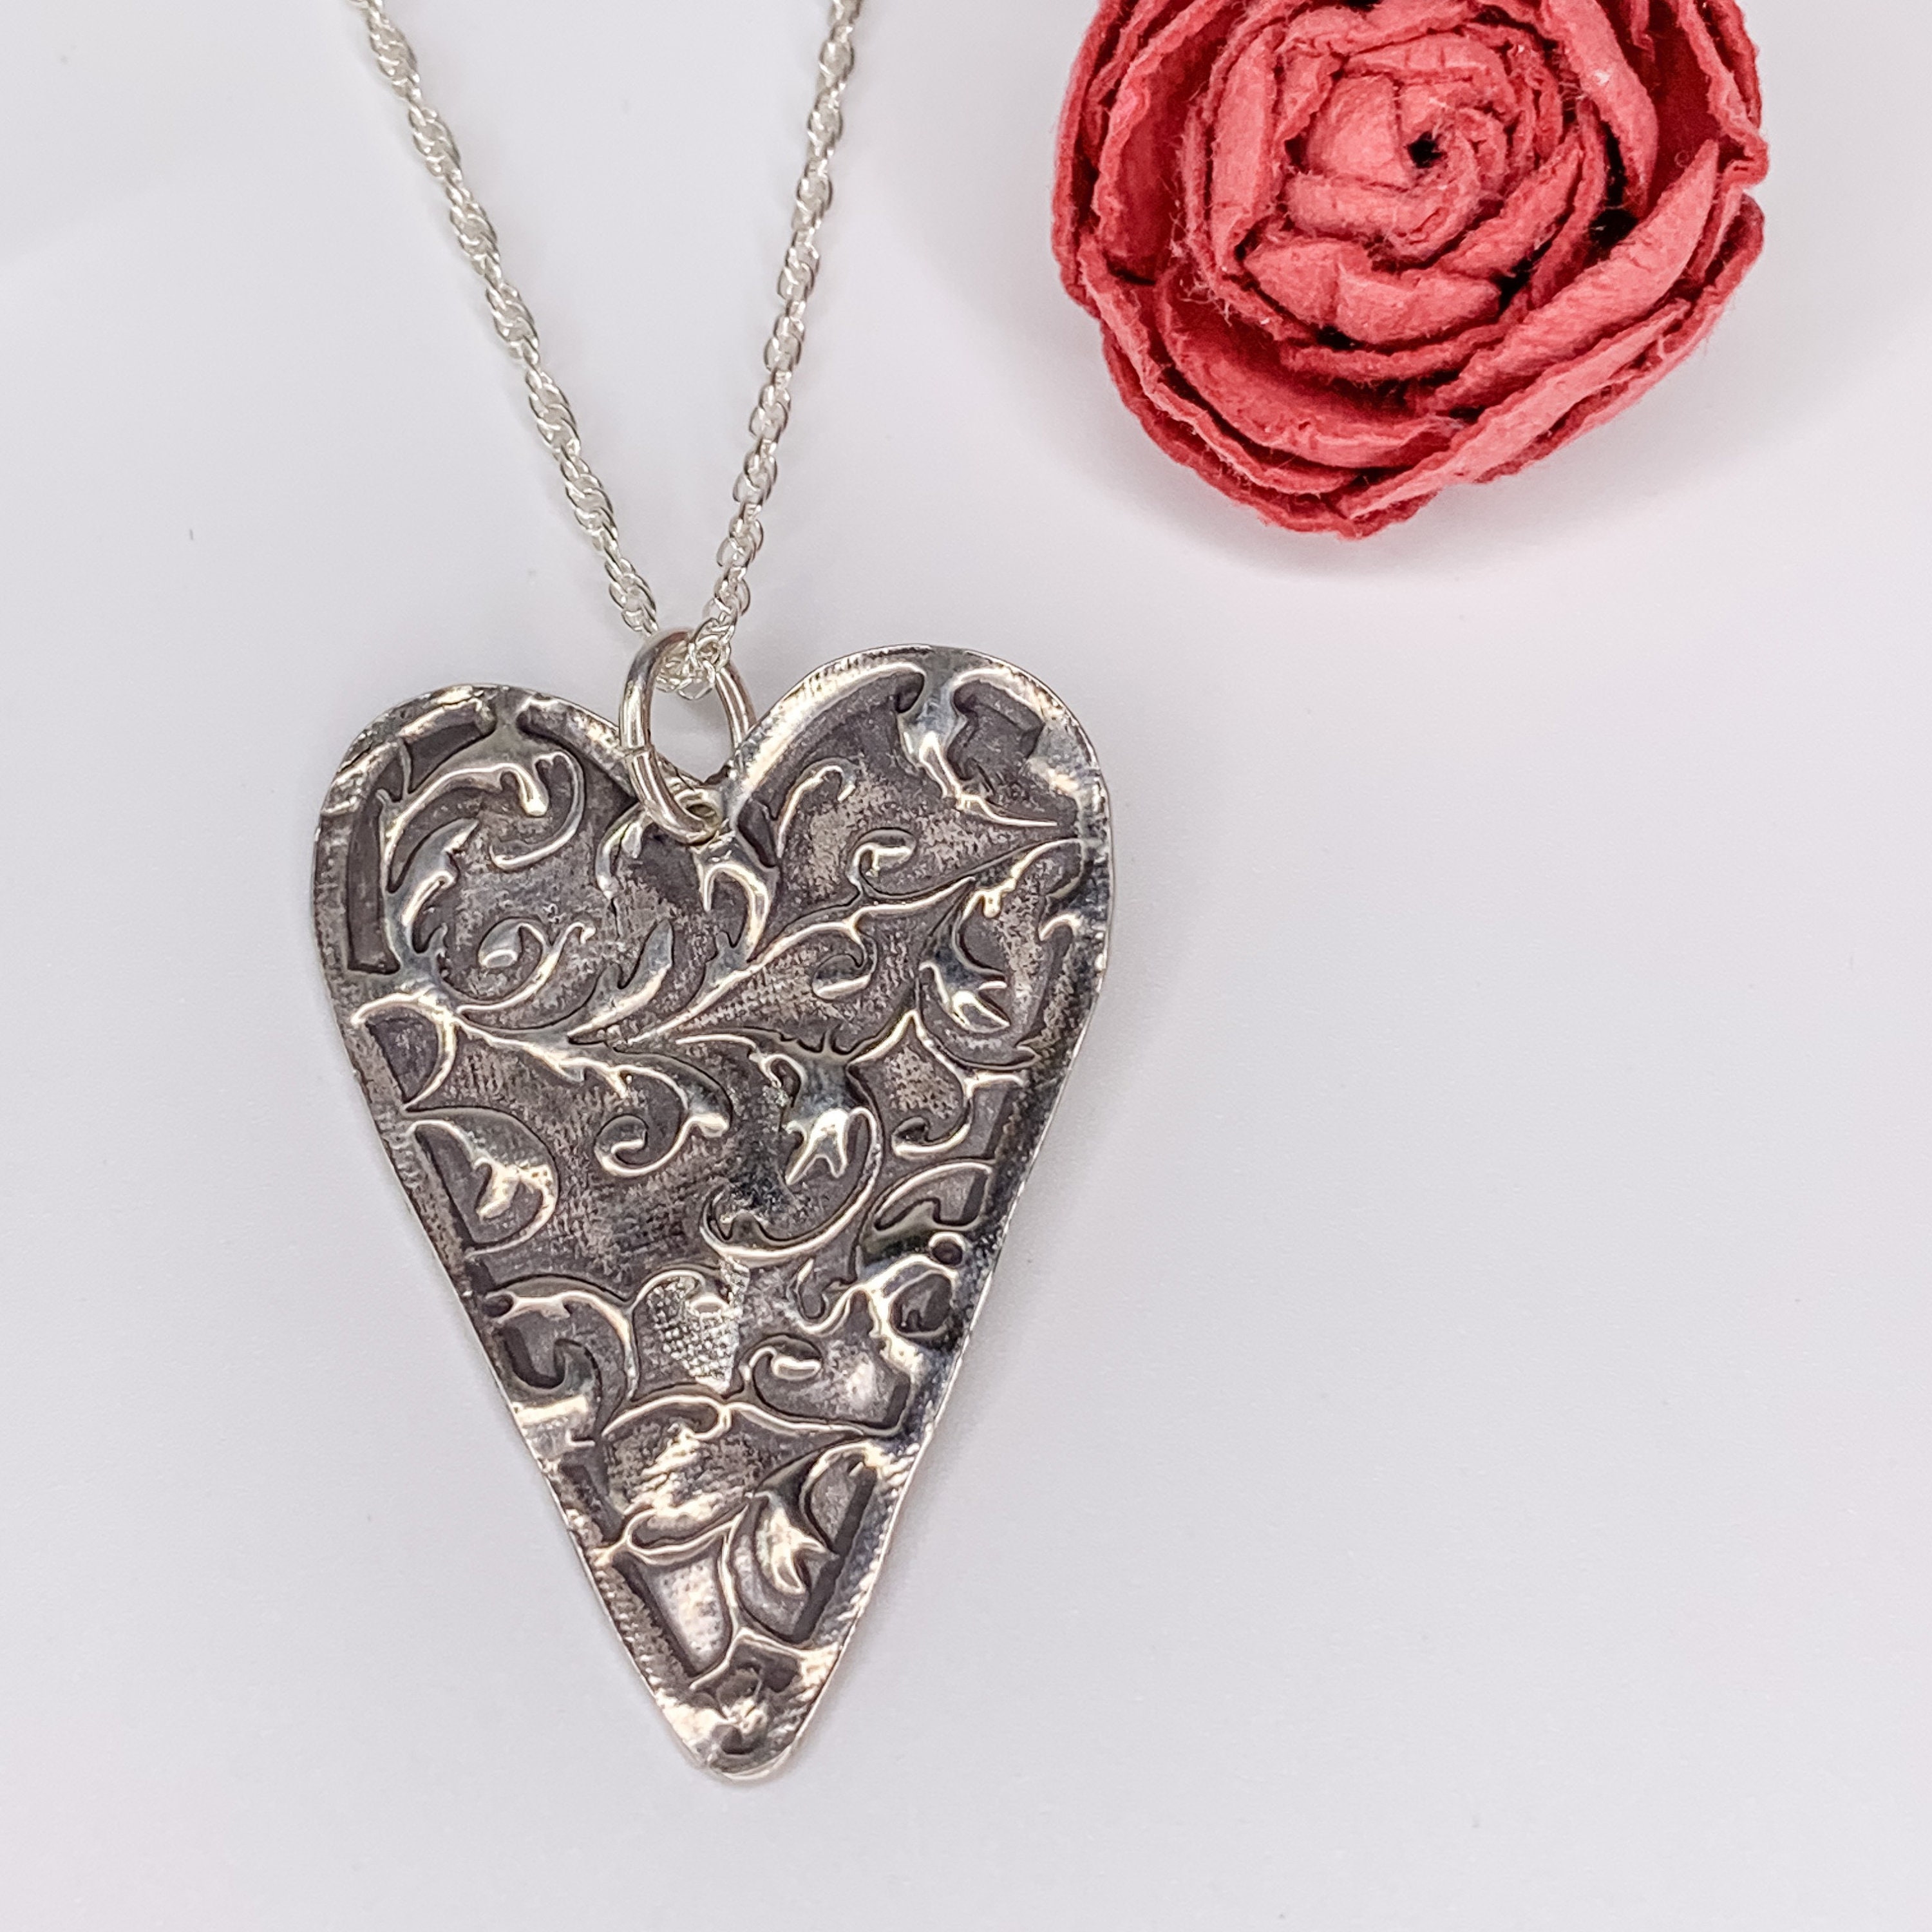 Silver Clay Jewelry Making Parties for Kids and Teens - Heart and Stone